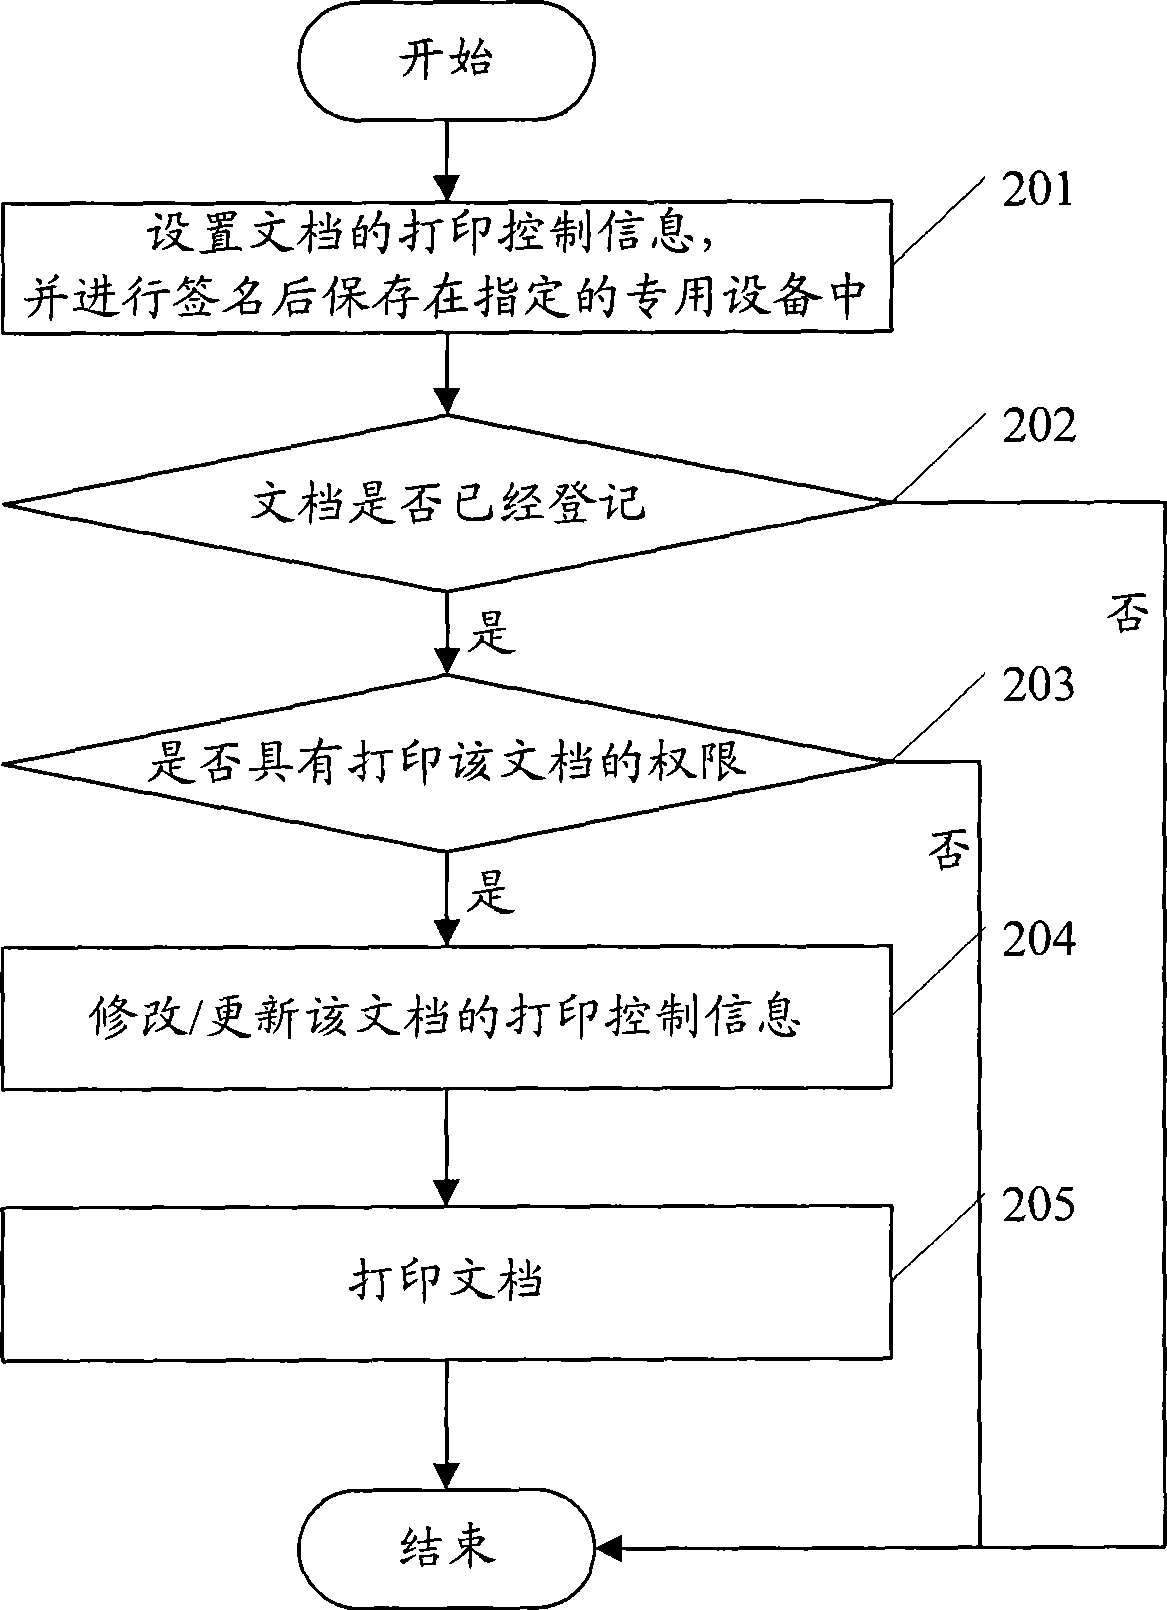 Method and system for implementing off-line printing limitation